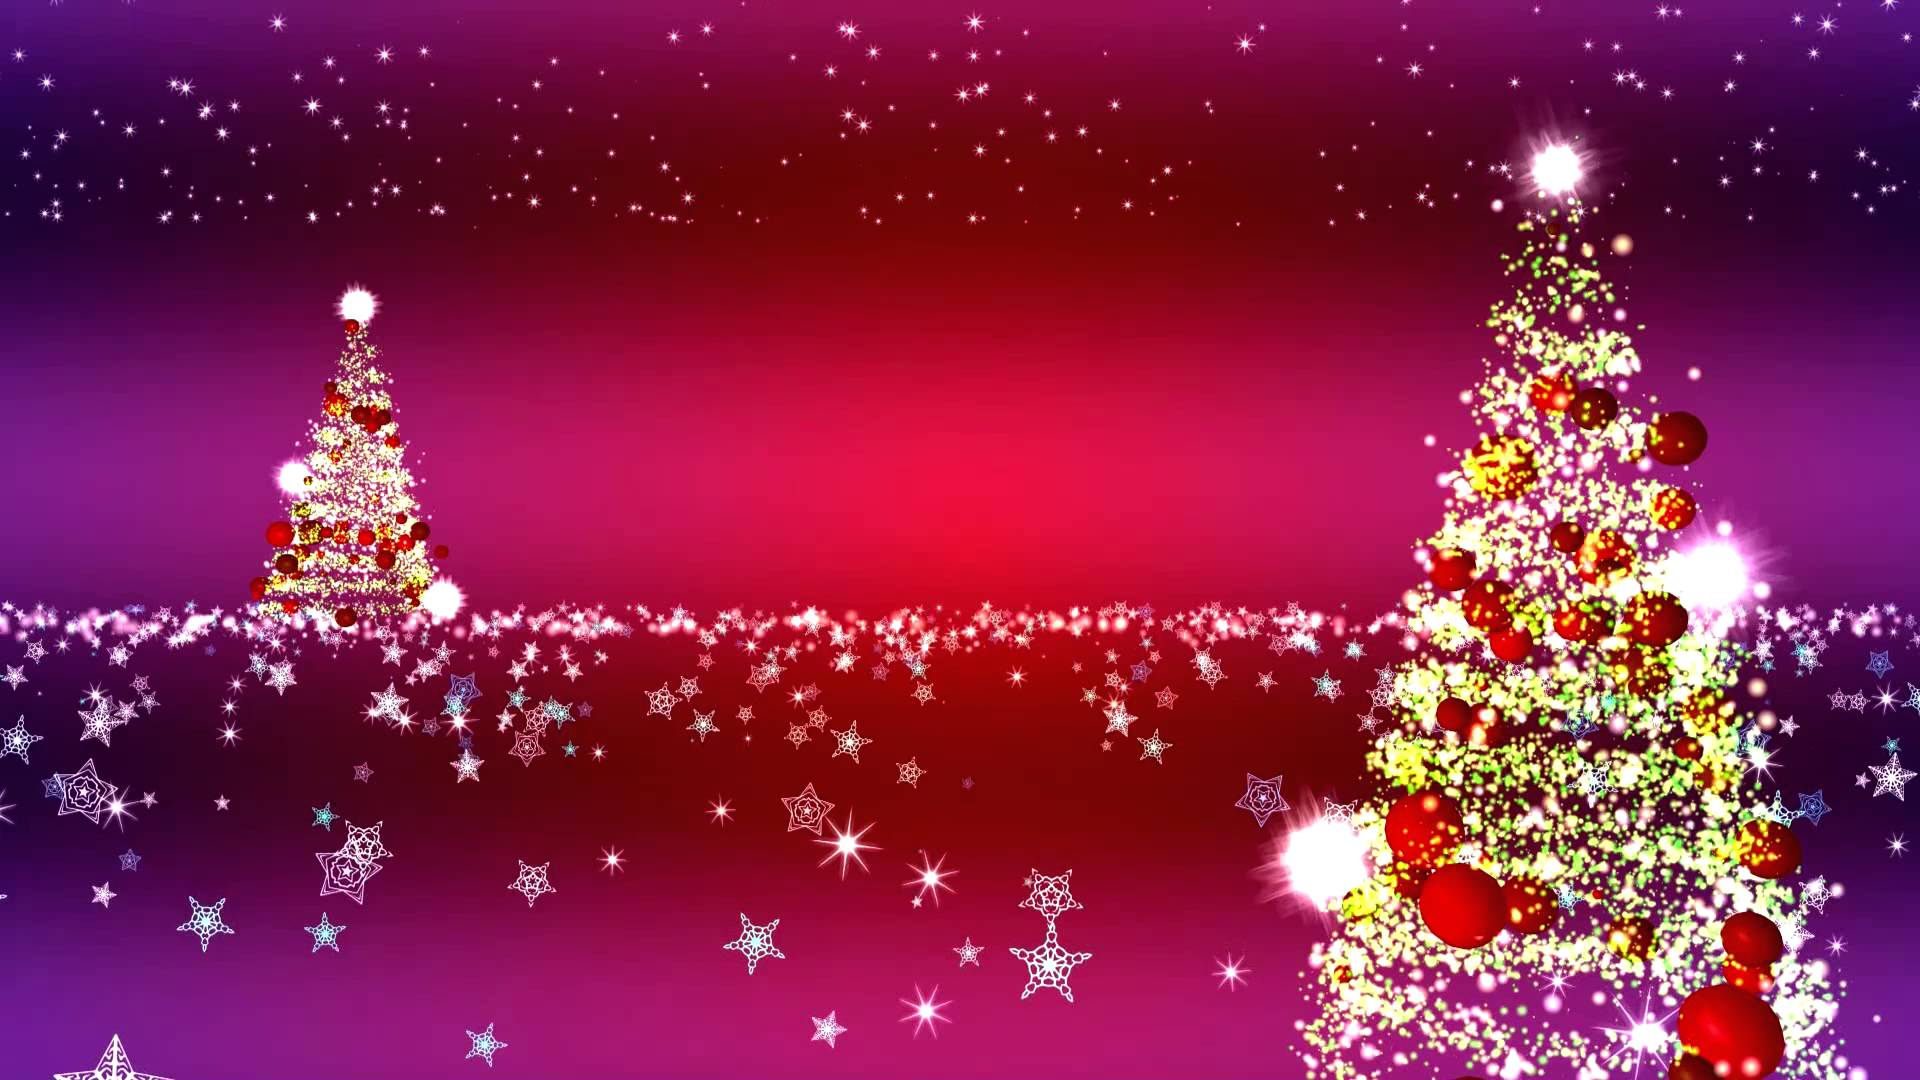 2015 Christmas background hd   wallpapers images photos 1920x1080